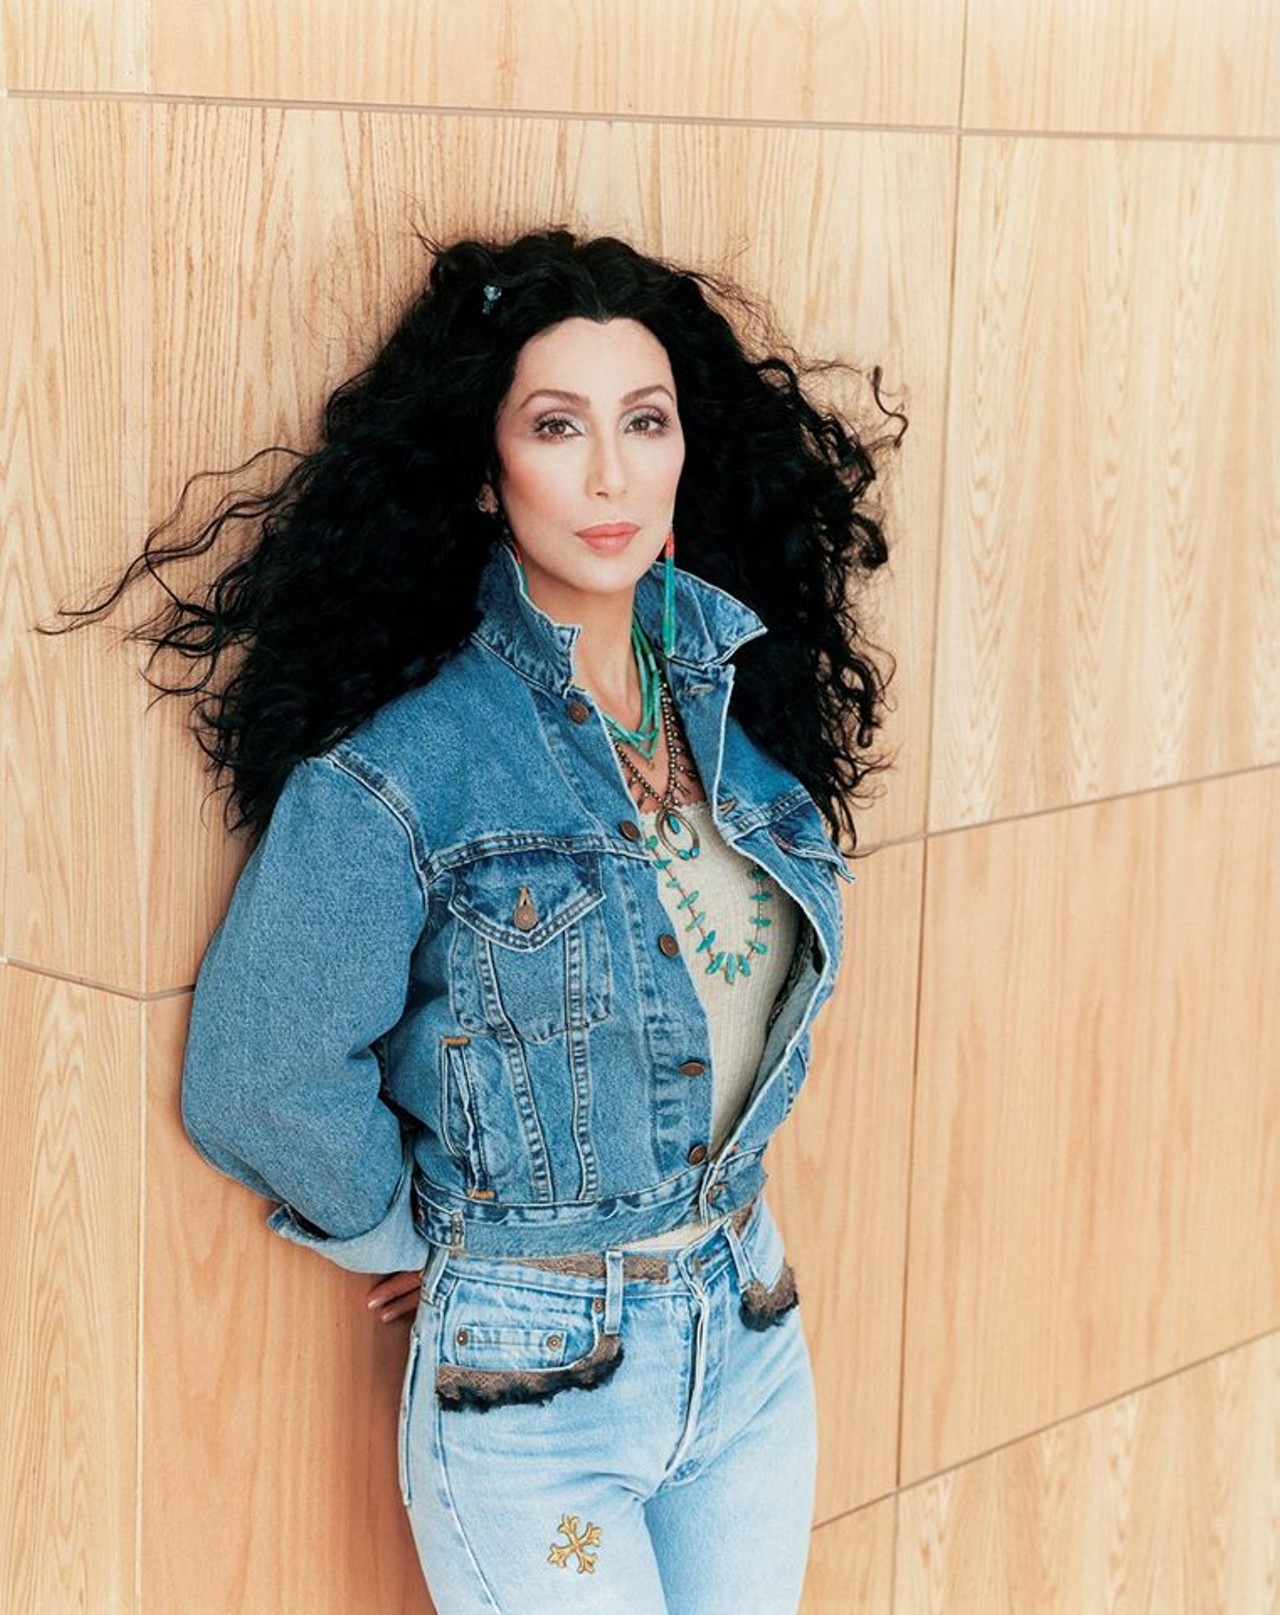 ’80s denim Cher. This also could be “Arizona Cher.” Come through, turquoise jewelry.
Photo via Facebook / Cher